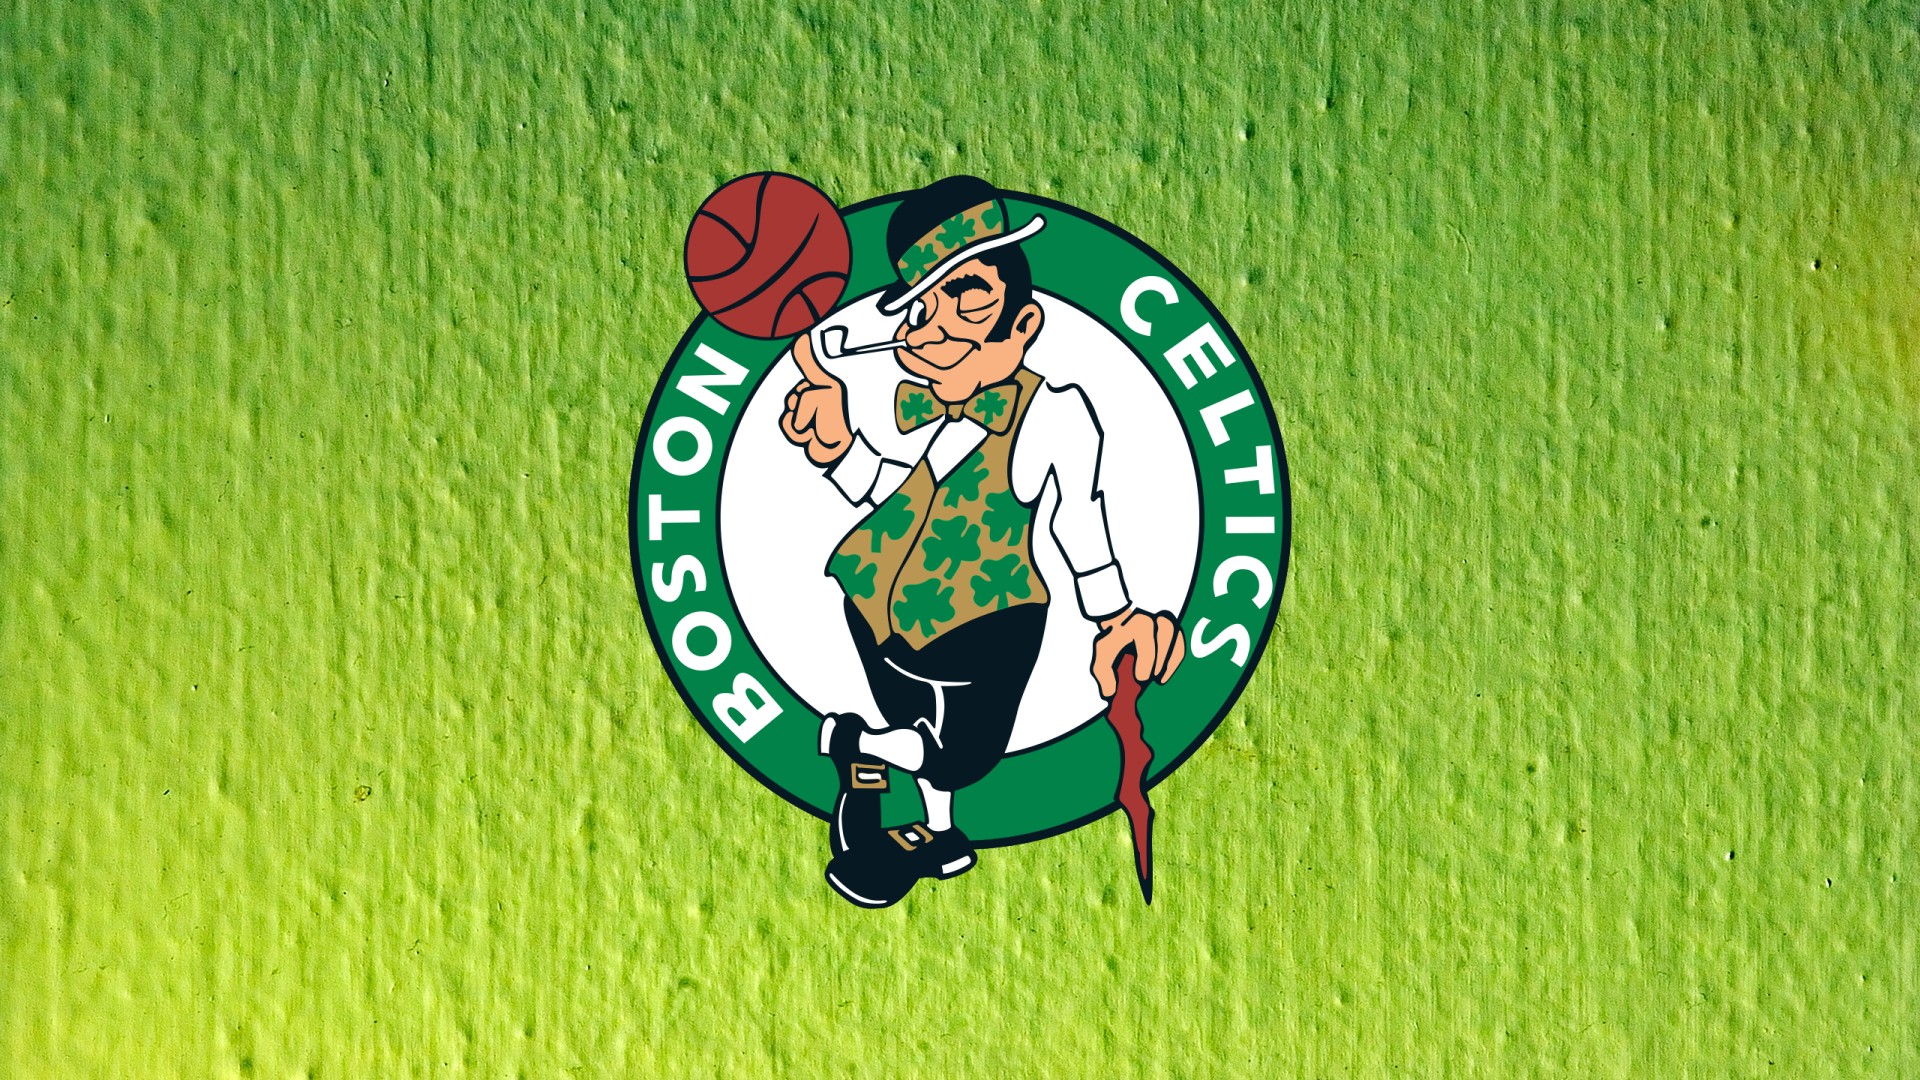 Wallpaper Boston Celtics HD with image resolution 1920x1080 pixel. You can make this wallpaper for your Desktop Computer Backgrounds, Mac Wallpapers, Android Lock screen or iPhone Screensavers